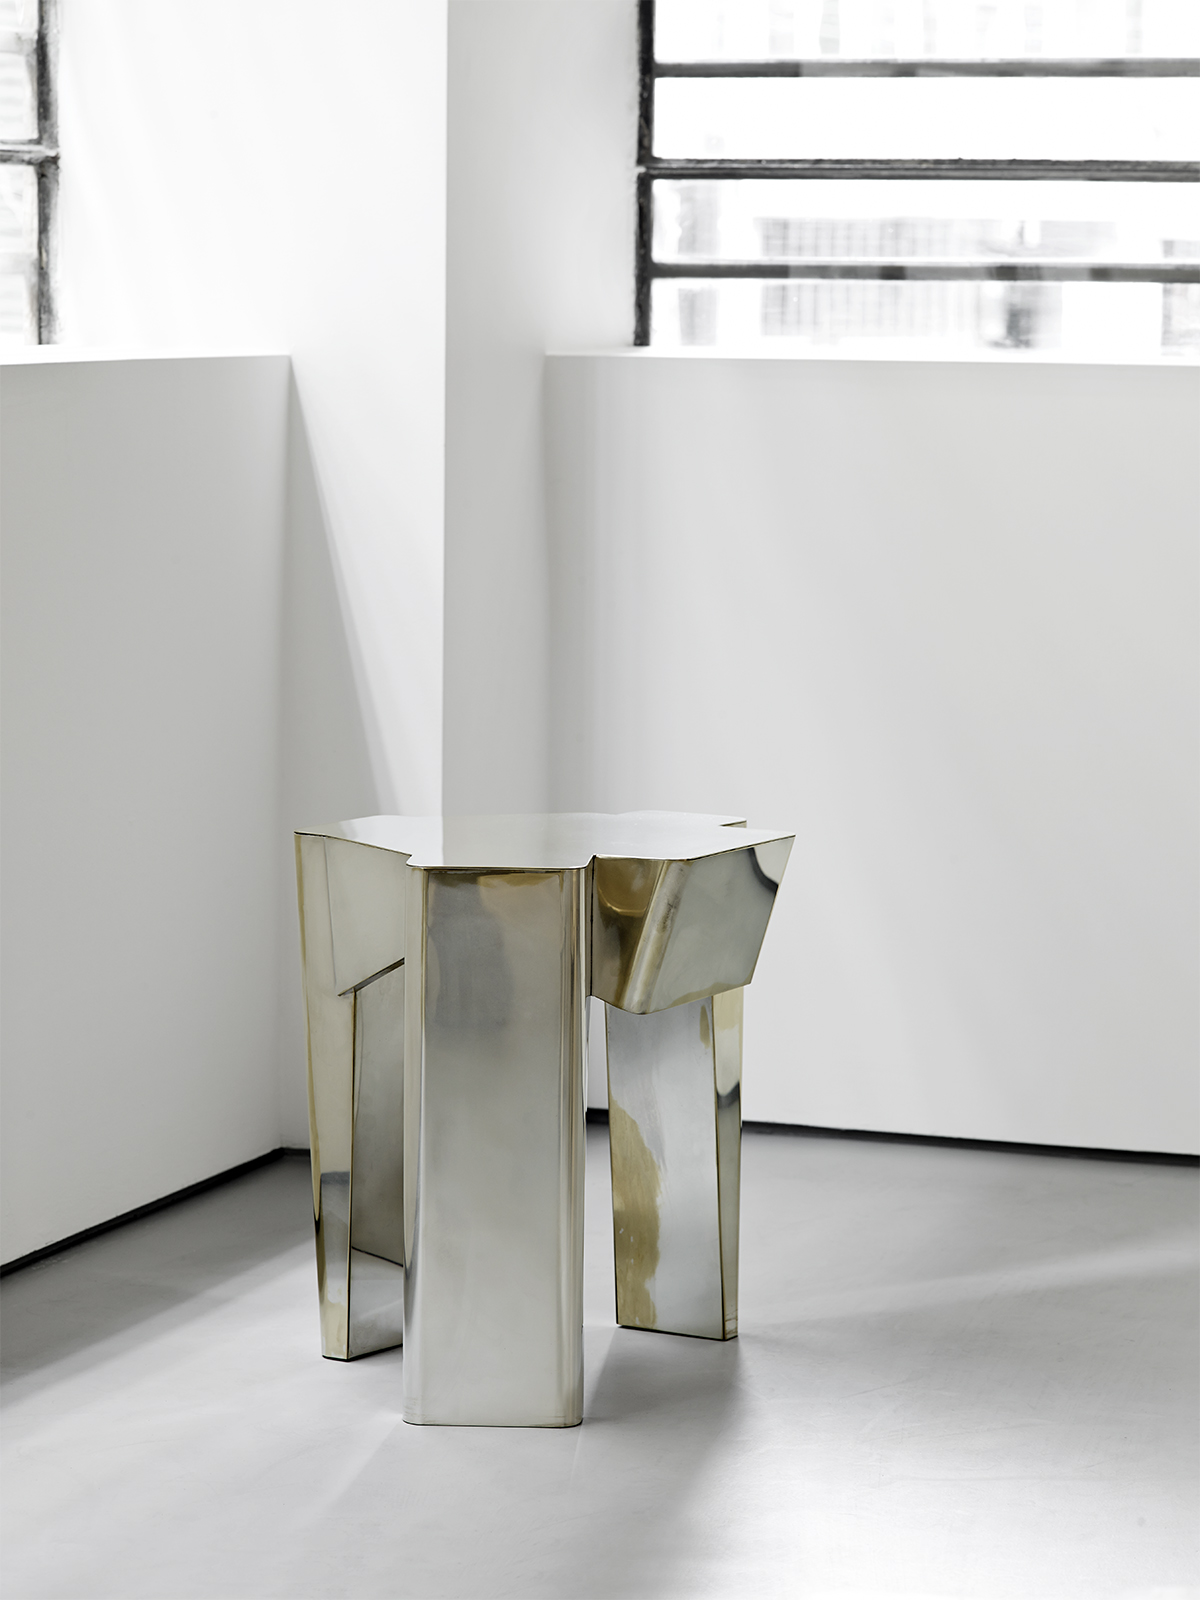 DC1617 silver plated brass side table Vicenzo de Cotiis 2016